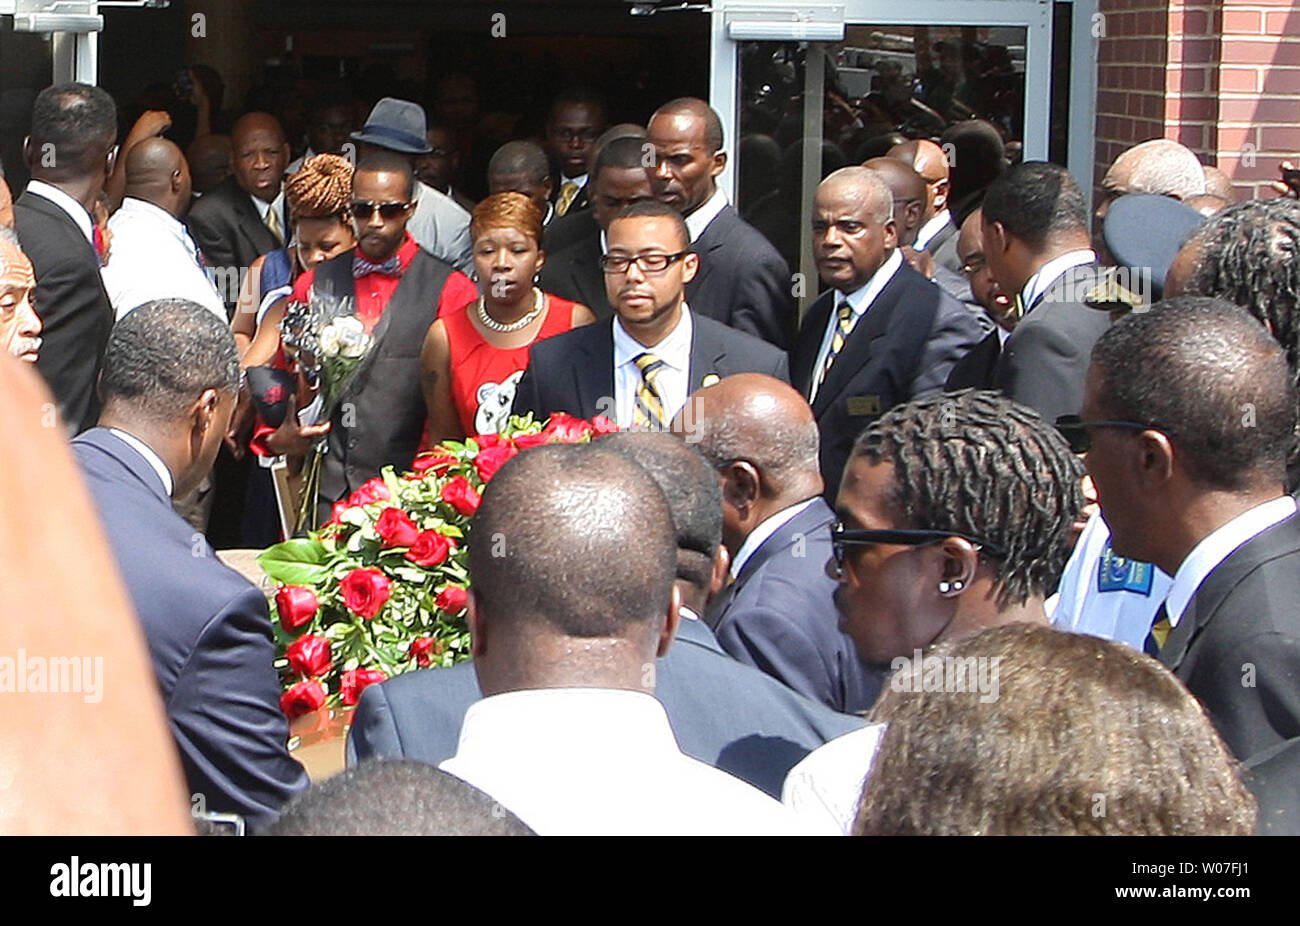 The remains of Michael Brown Jr. prepare to leave the Friendly Temple Missionary Baptist Church at the completion of his funeral in St. Louis on August 25, 2014. Brown gained attention after he was shot by a white Ferguson, Missouri police officer on August 9 and was unarmed. The shooting led to several nights of looting, arrests and heavy police presence.   UPI/Bill Greenblatt Stock Photo